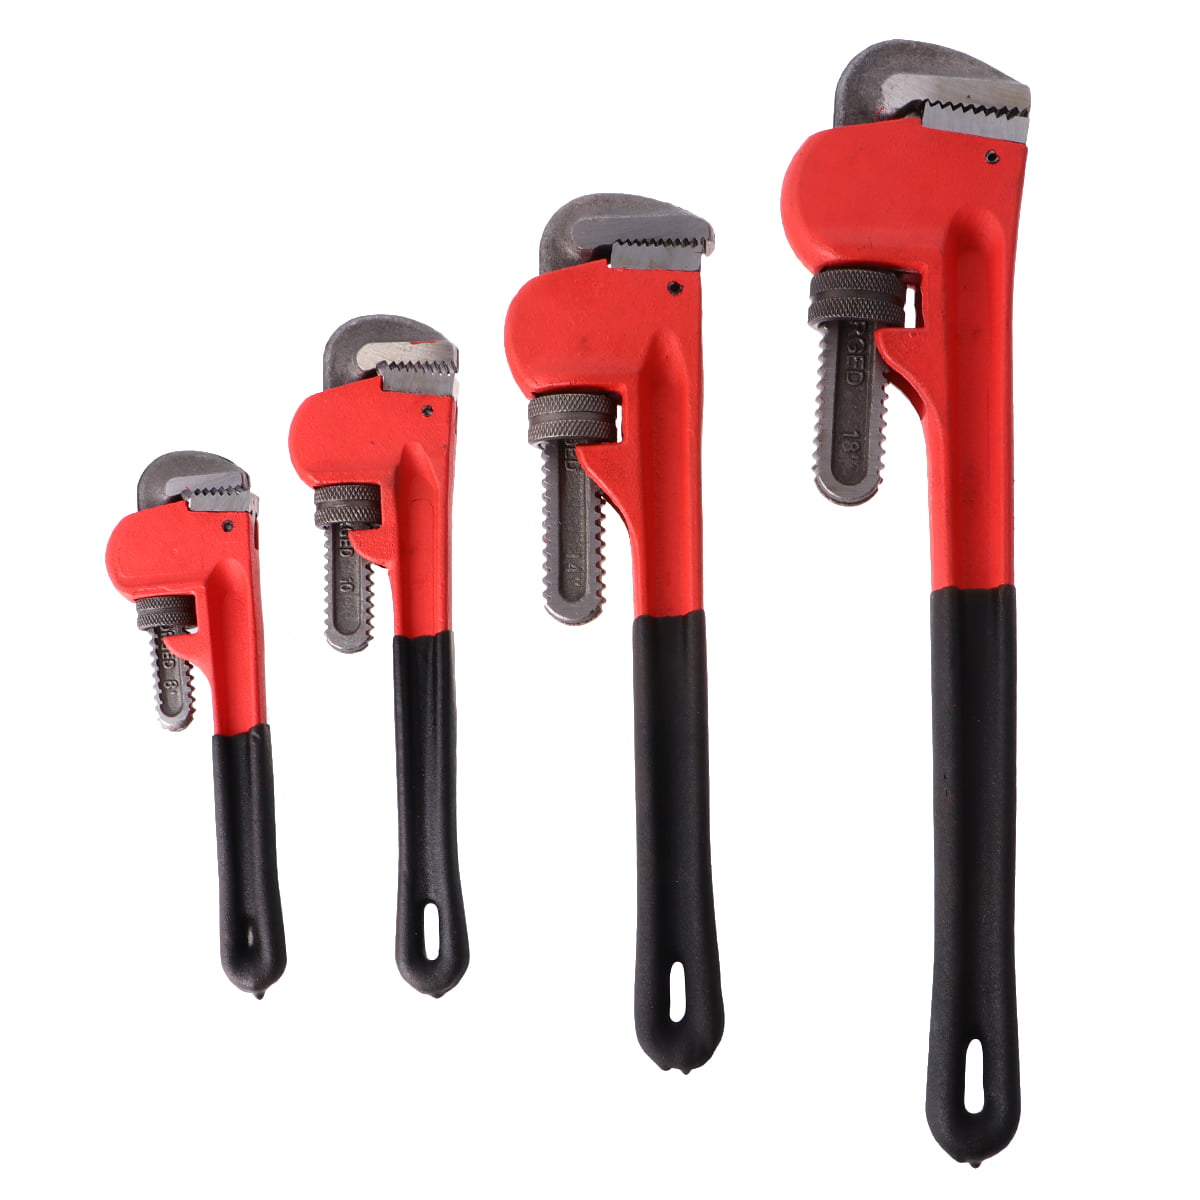 18in Iron Straight Pipe Adjustable Wrench Plumbing Water Gas Soft Grip 